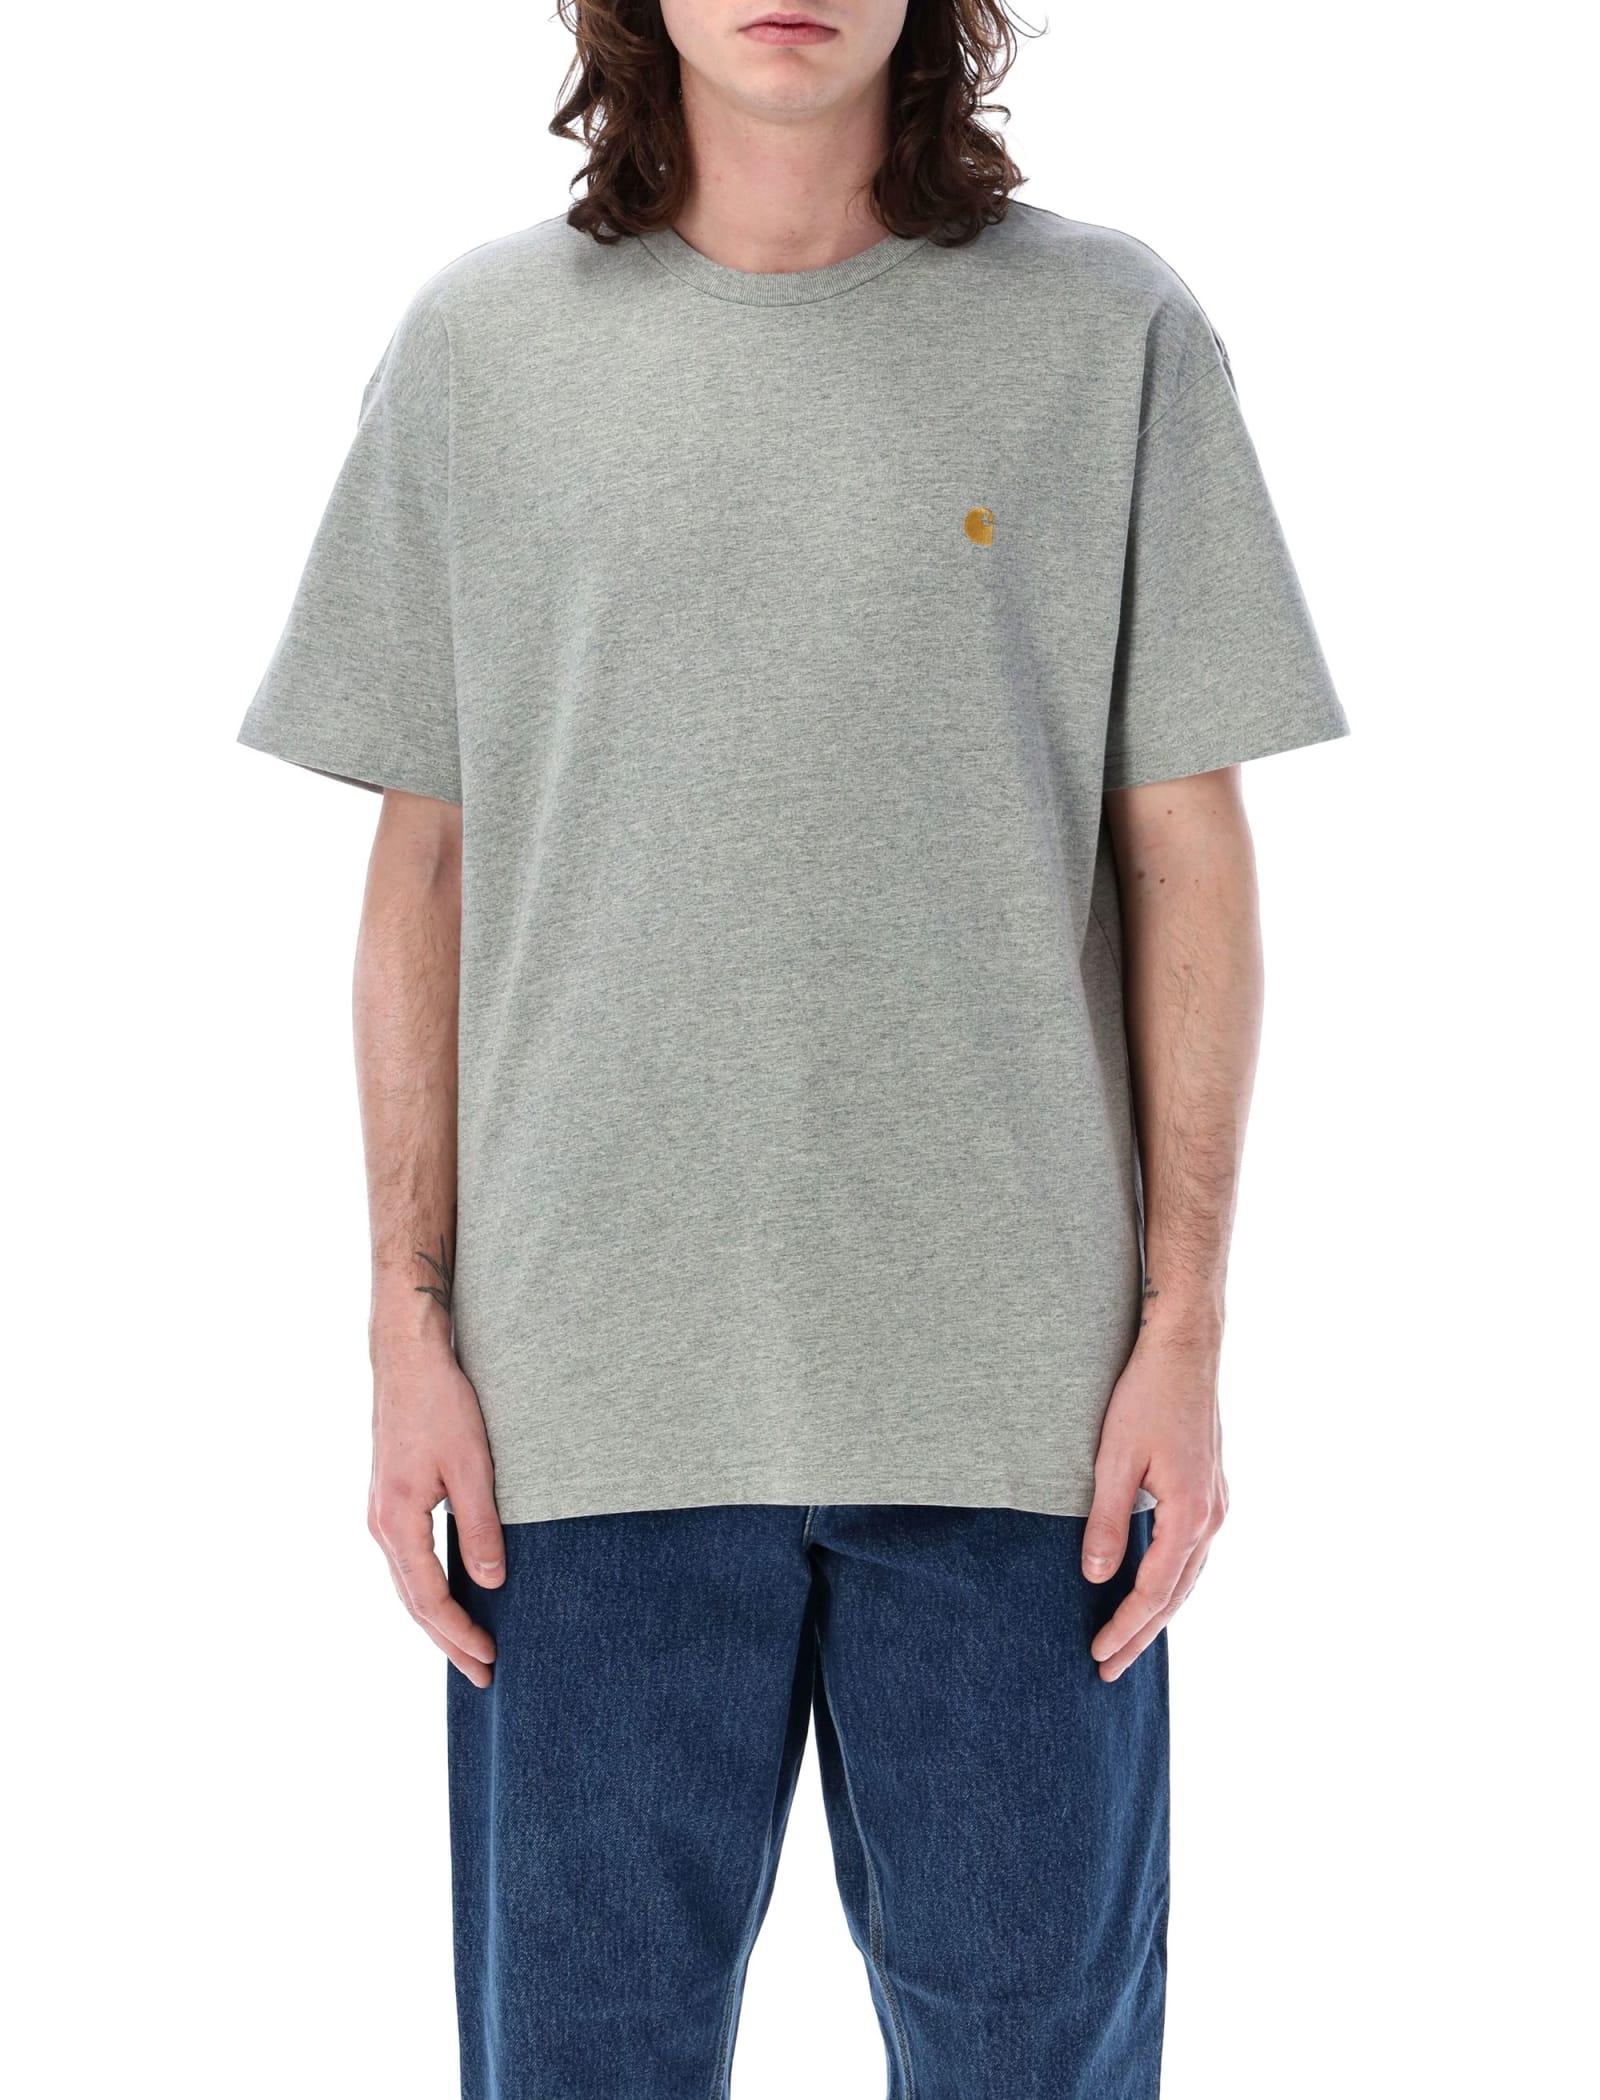 Chase S/s T-shirt